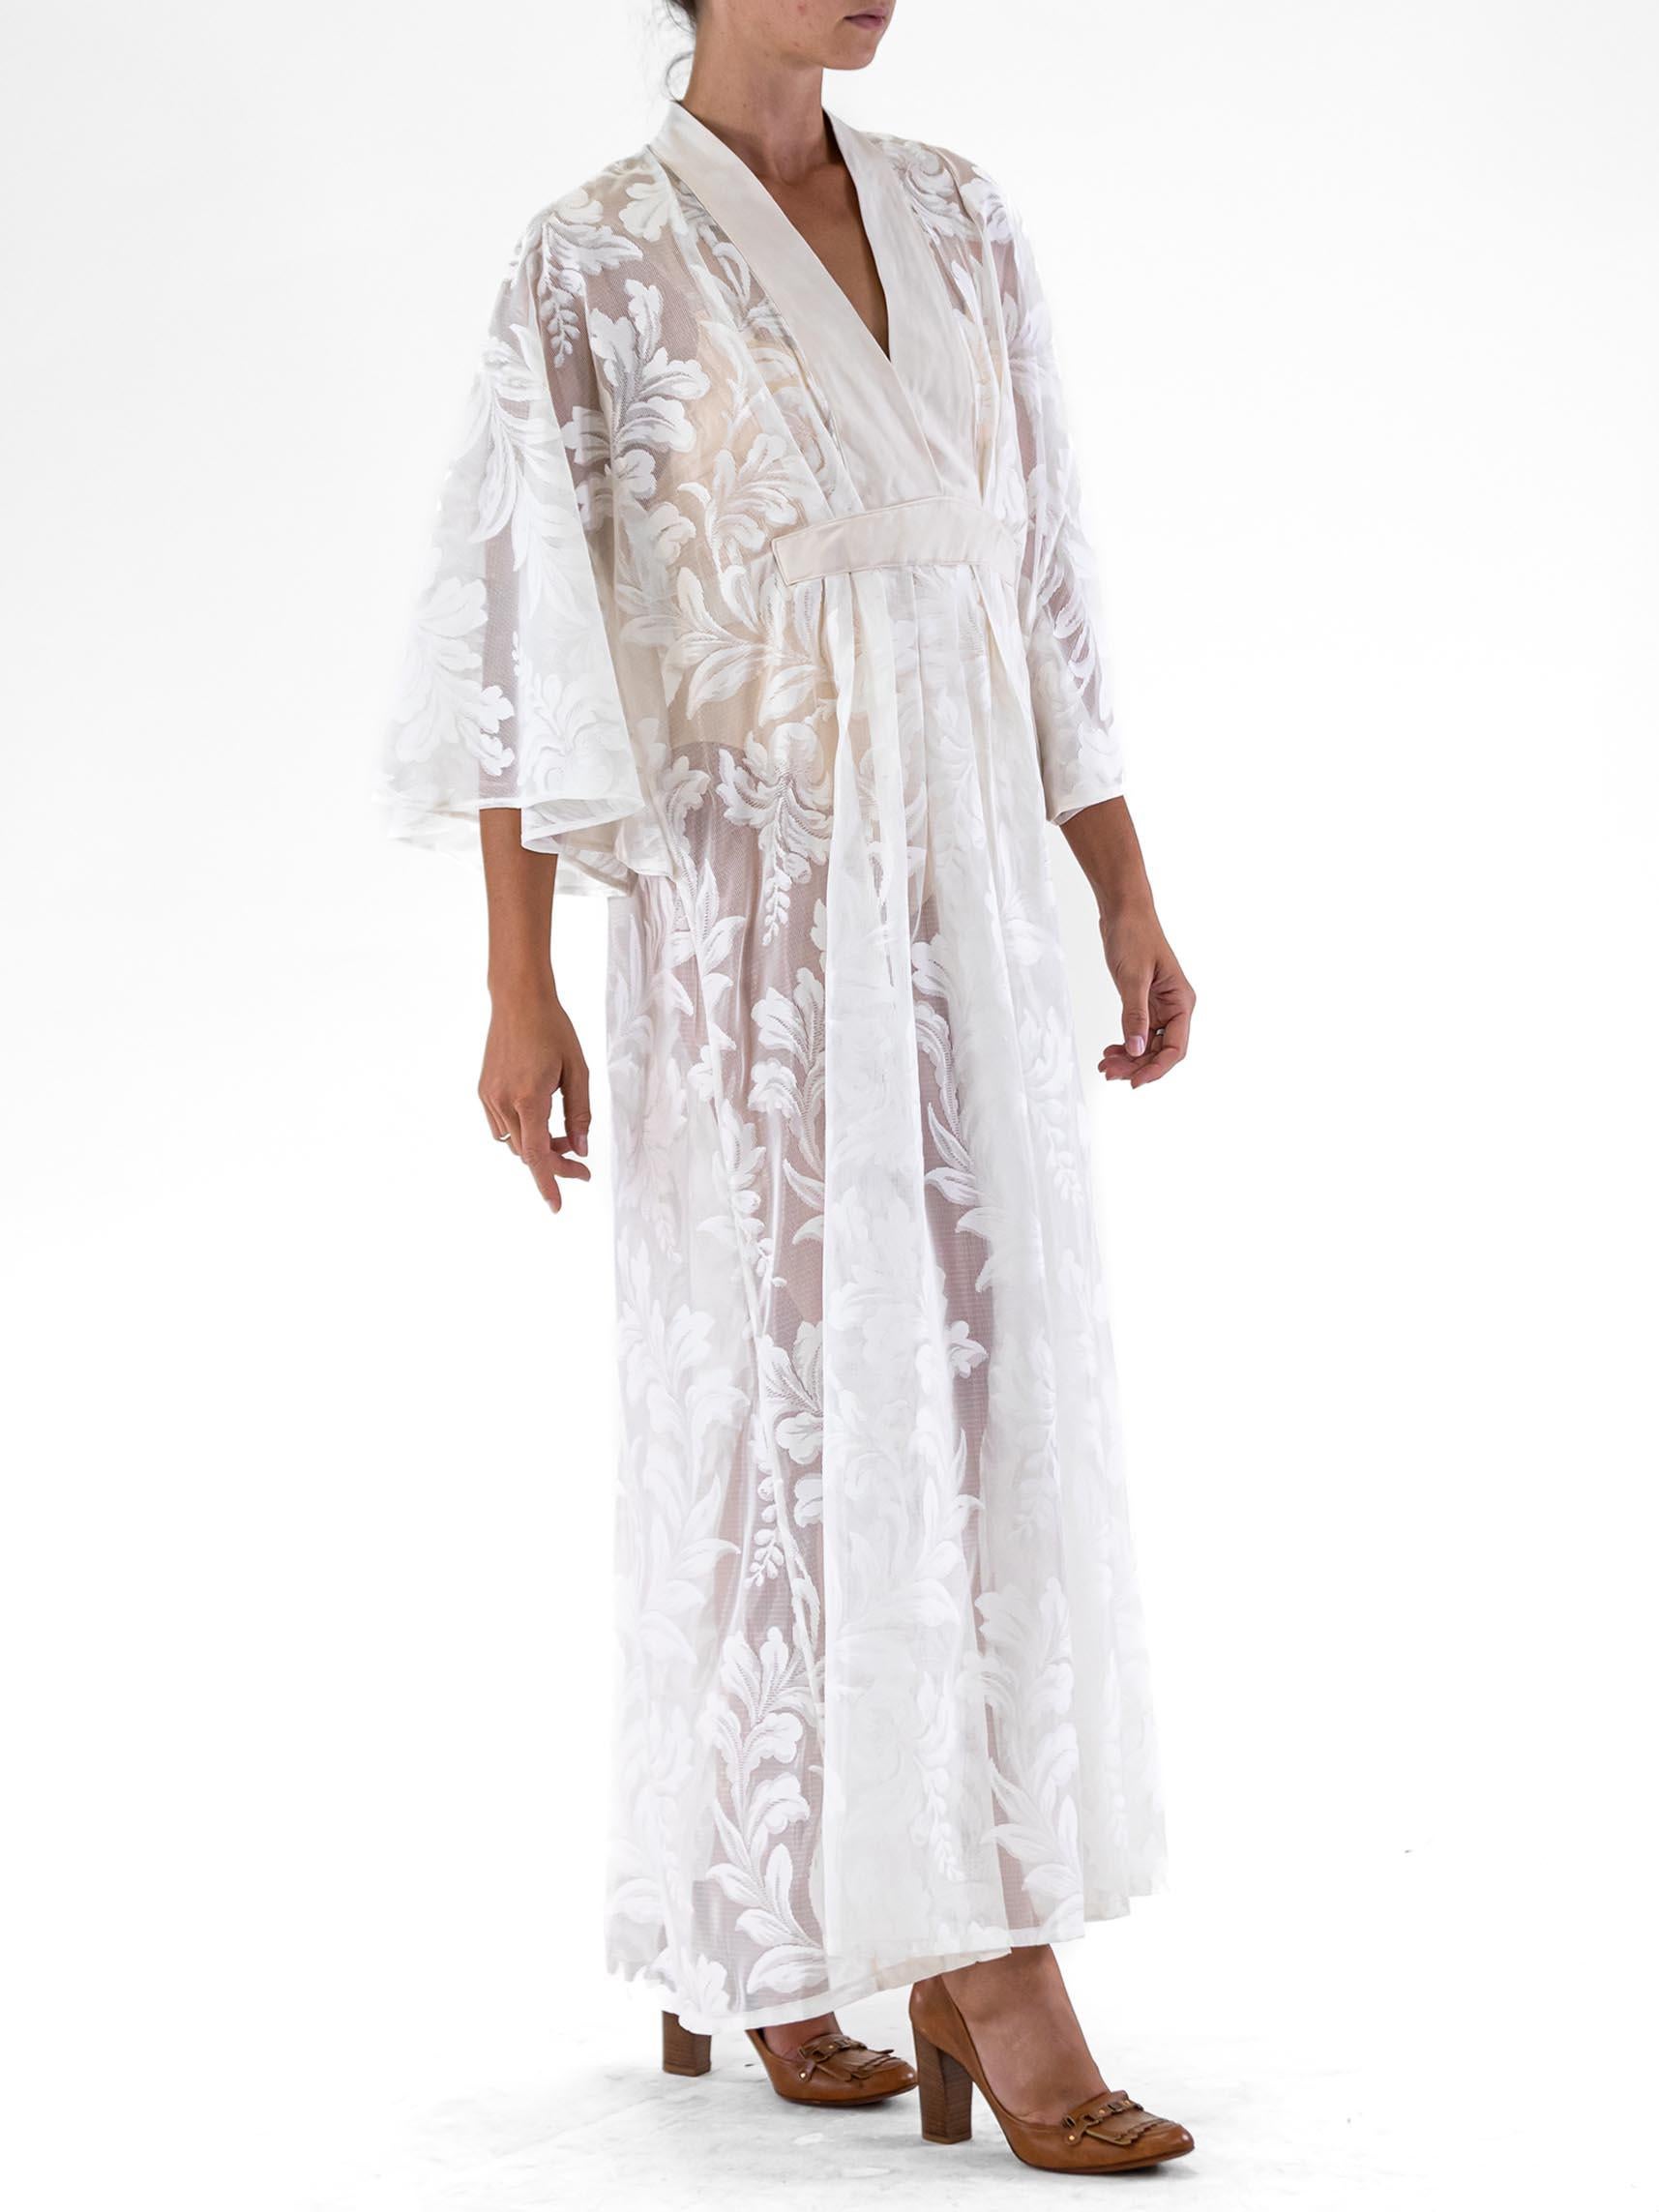 We scored an amazing cache of deadstock vintage 1970s tropical lace in Florida and were inspired to turn it into a limited edition run of kaftans. Using our classic fitted/unfitted kaftan pattern. There is an internal optional elastic waistband